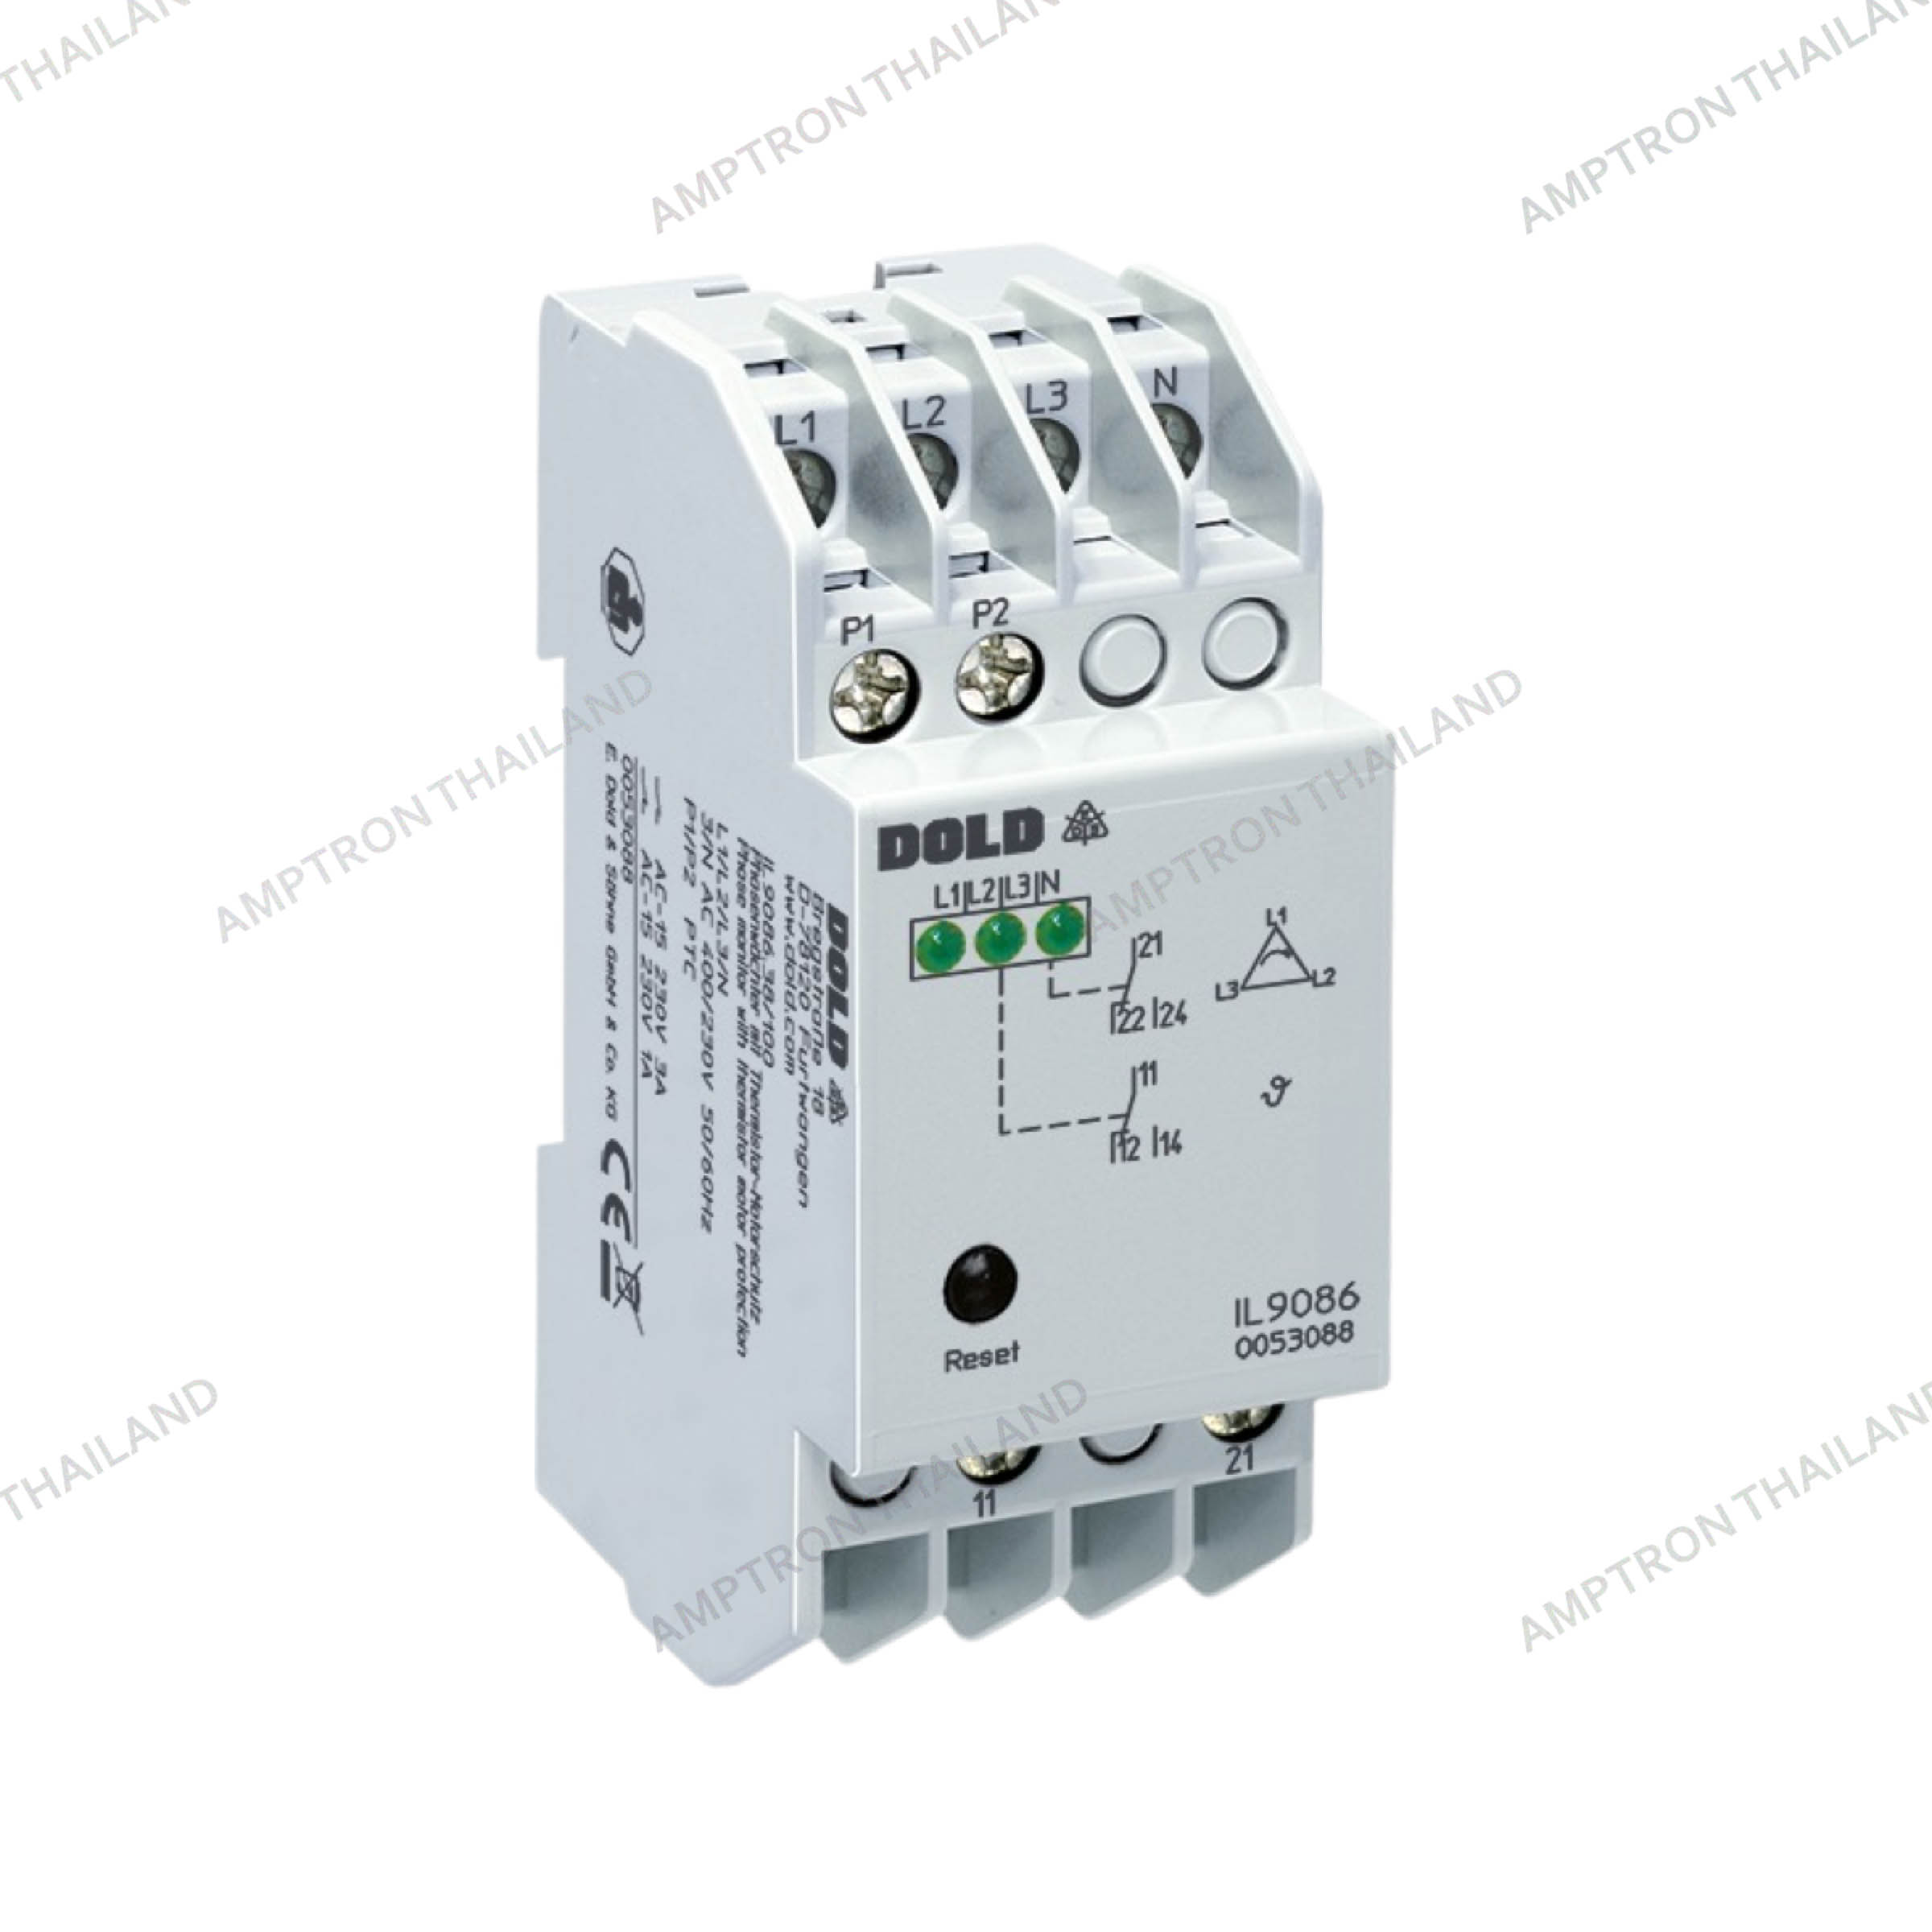 IL 9086 VARIMETER PRO Phase Monitor with thermistor motor protection